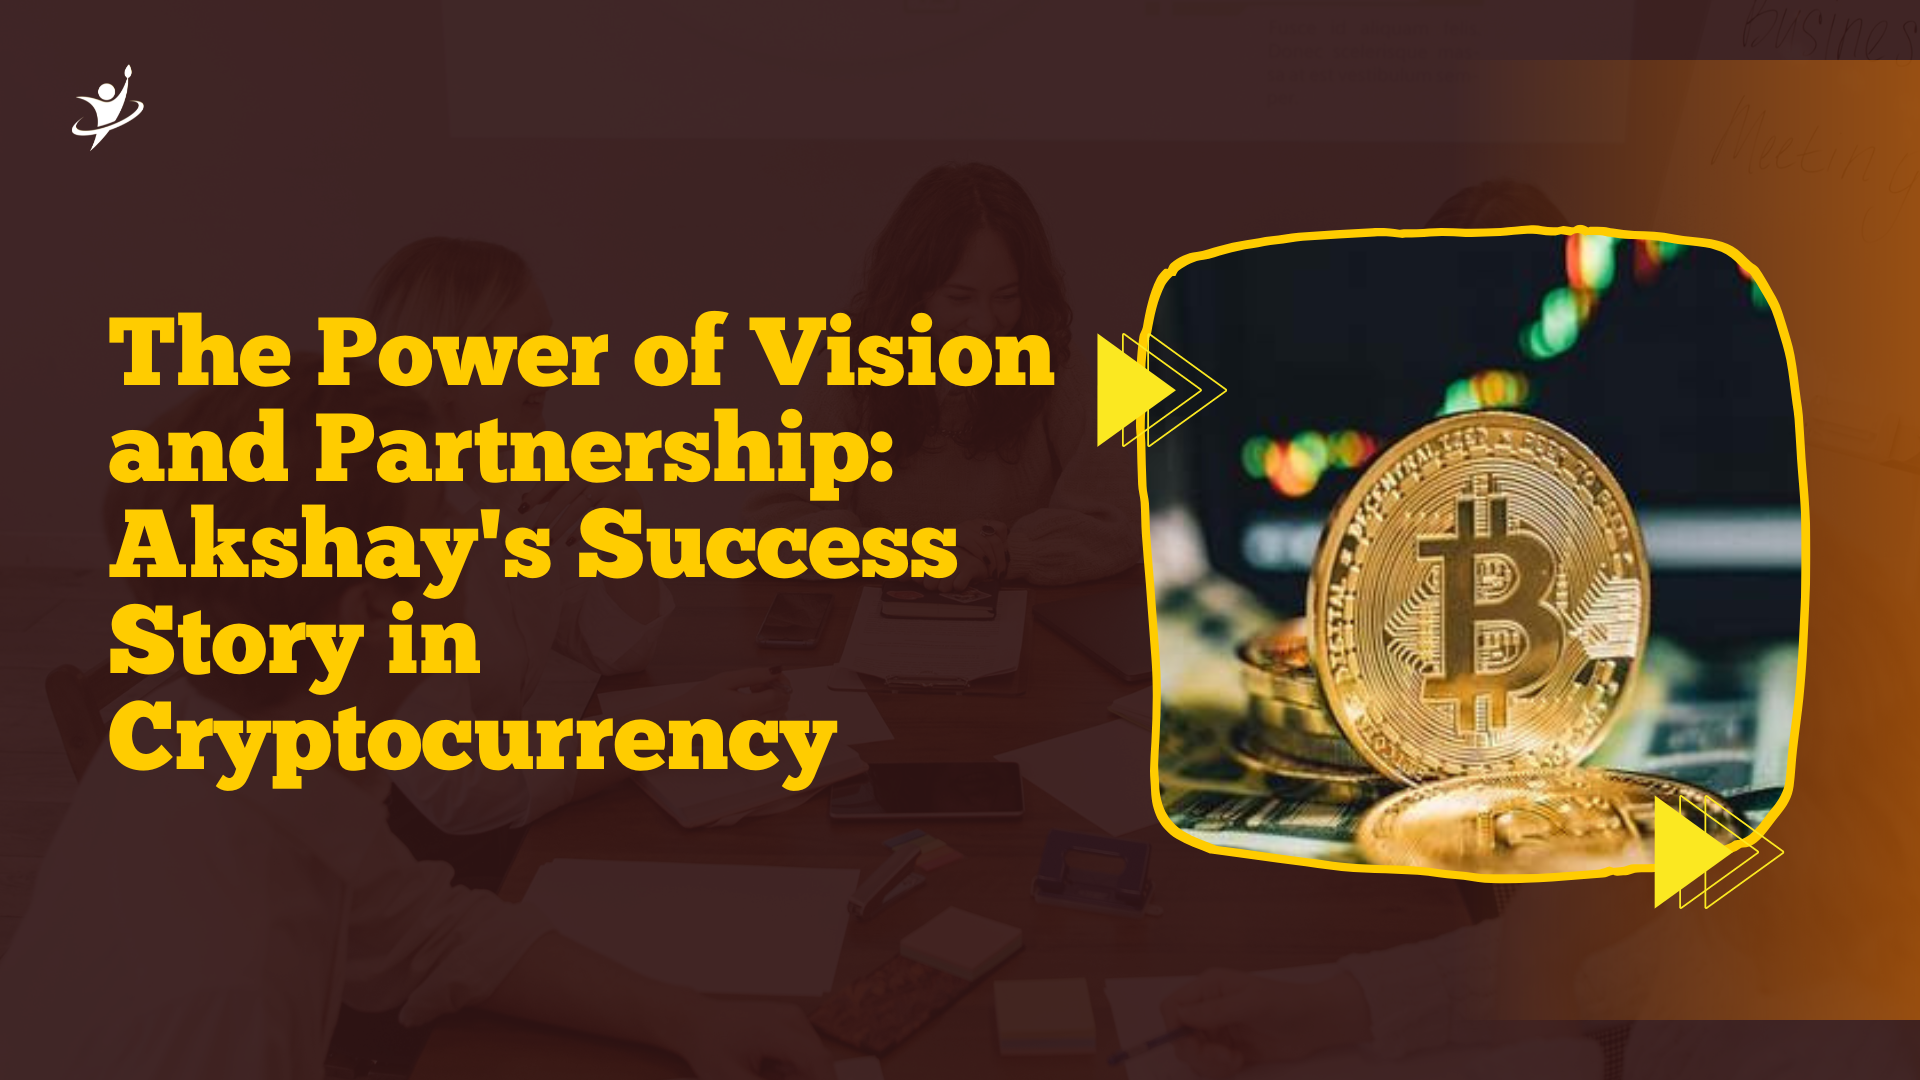 The Power of Vision and Partnership: Akshay's Success Story in Cryptocurrency